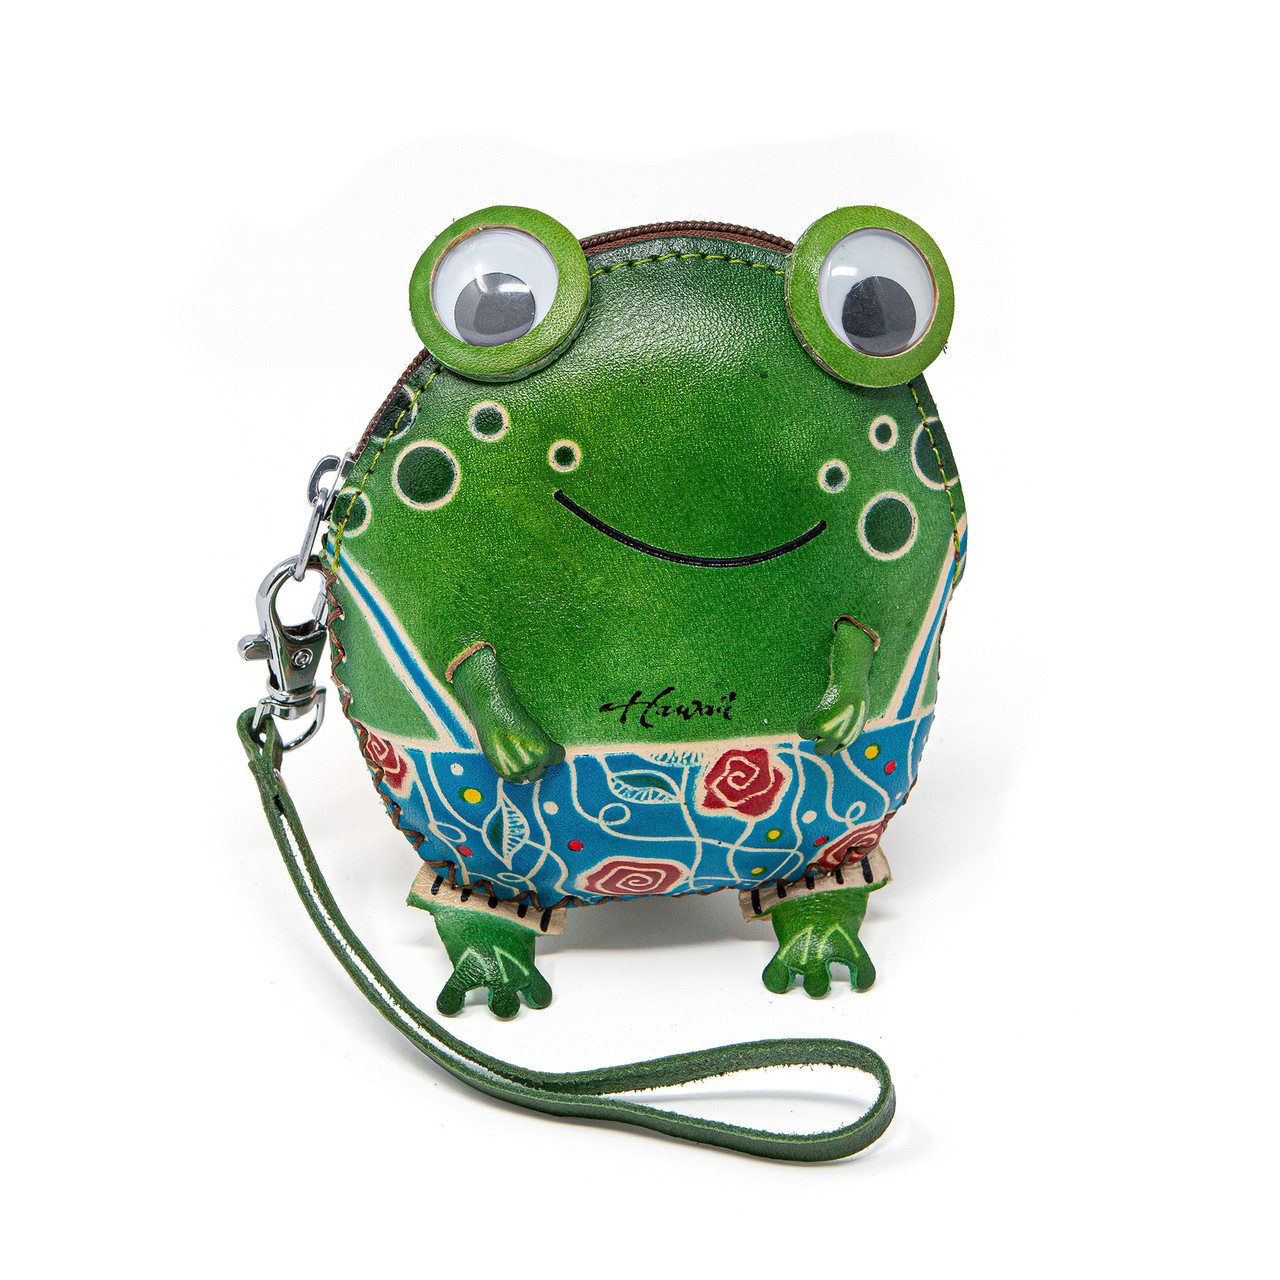 Buy Frog Coin Purse Crochet Pattern Online in India - Etsy